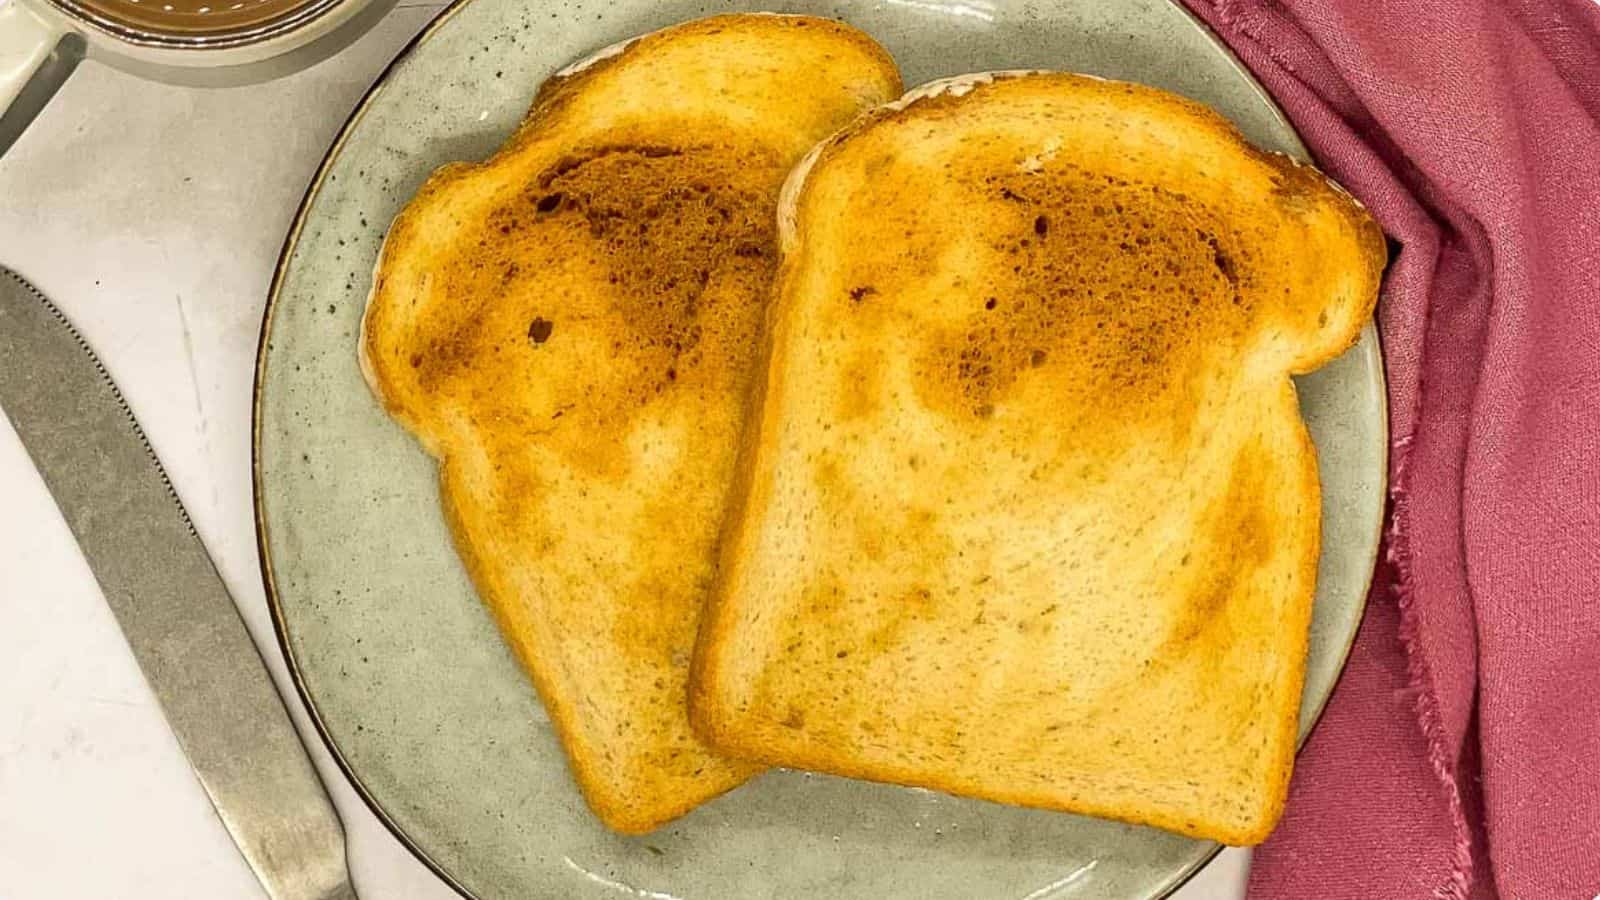 Two slices of toast on a plate with a cup of coffee.